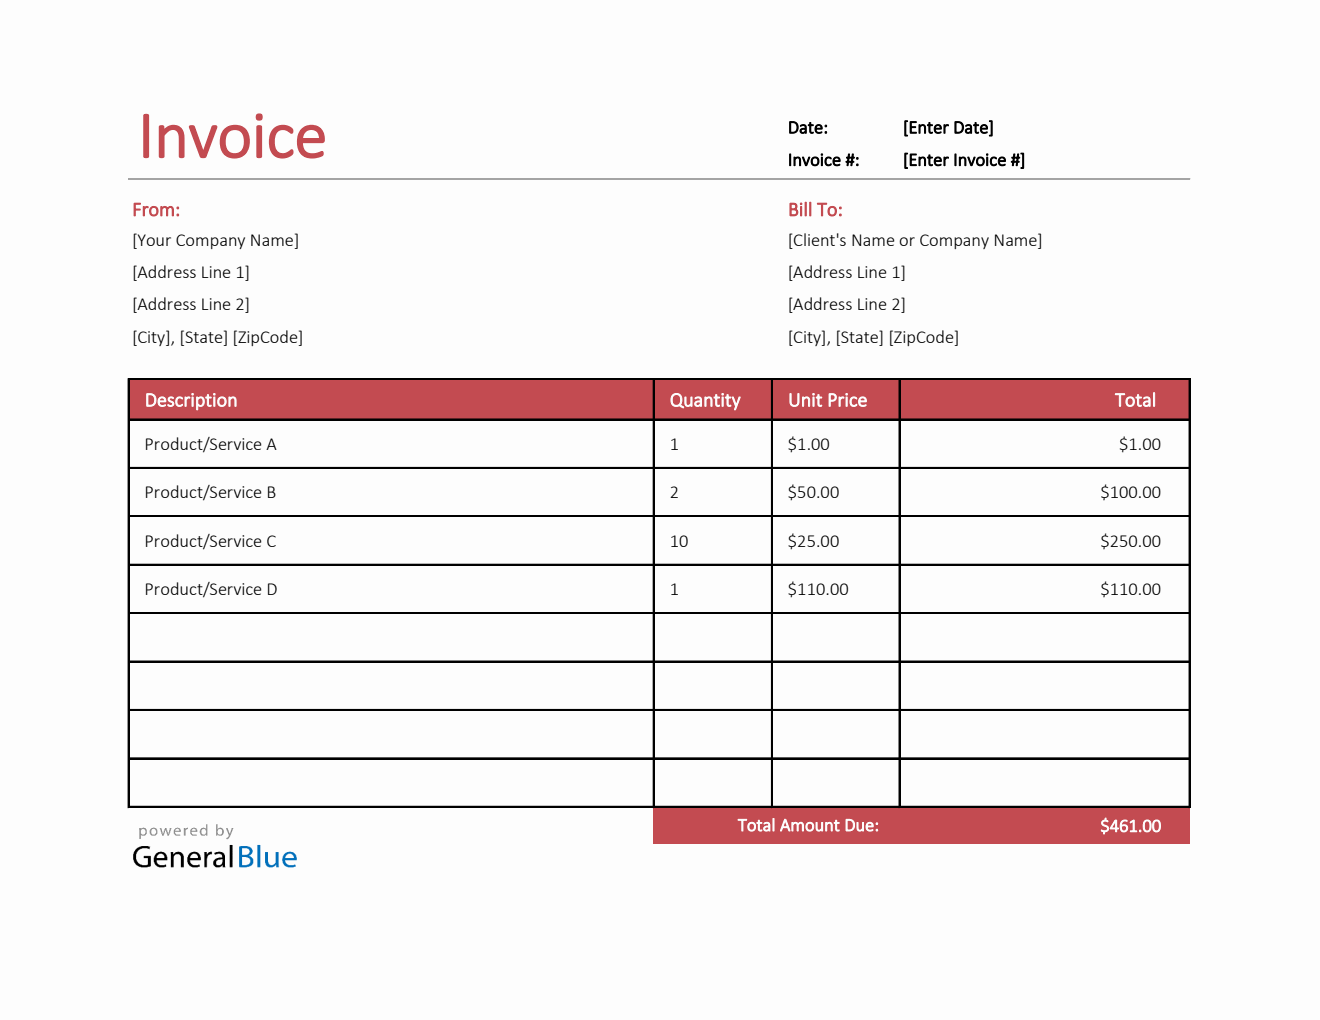 U.S. Invoice Template in Excel (Bordered)